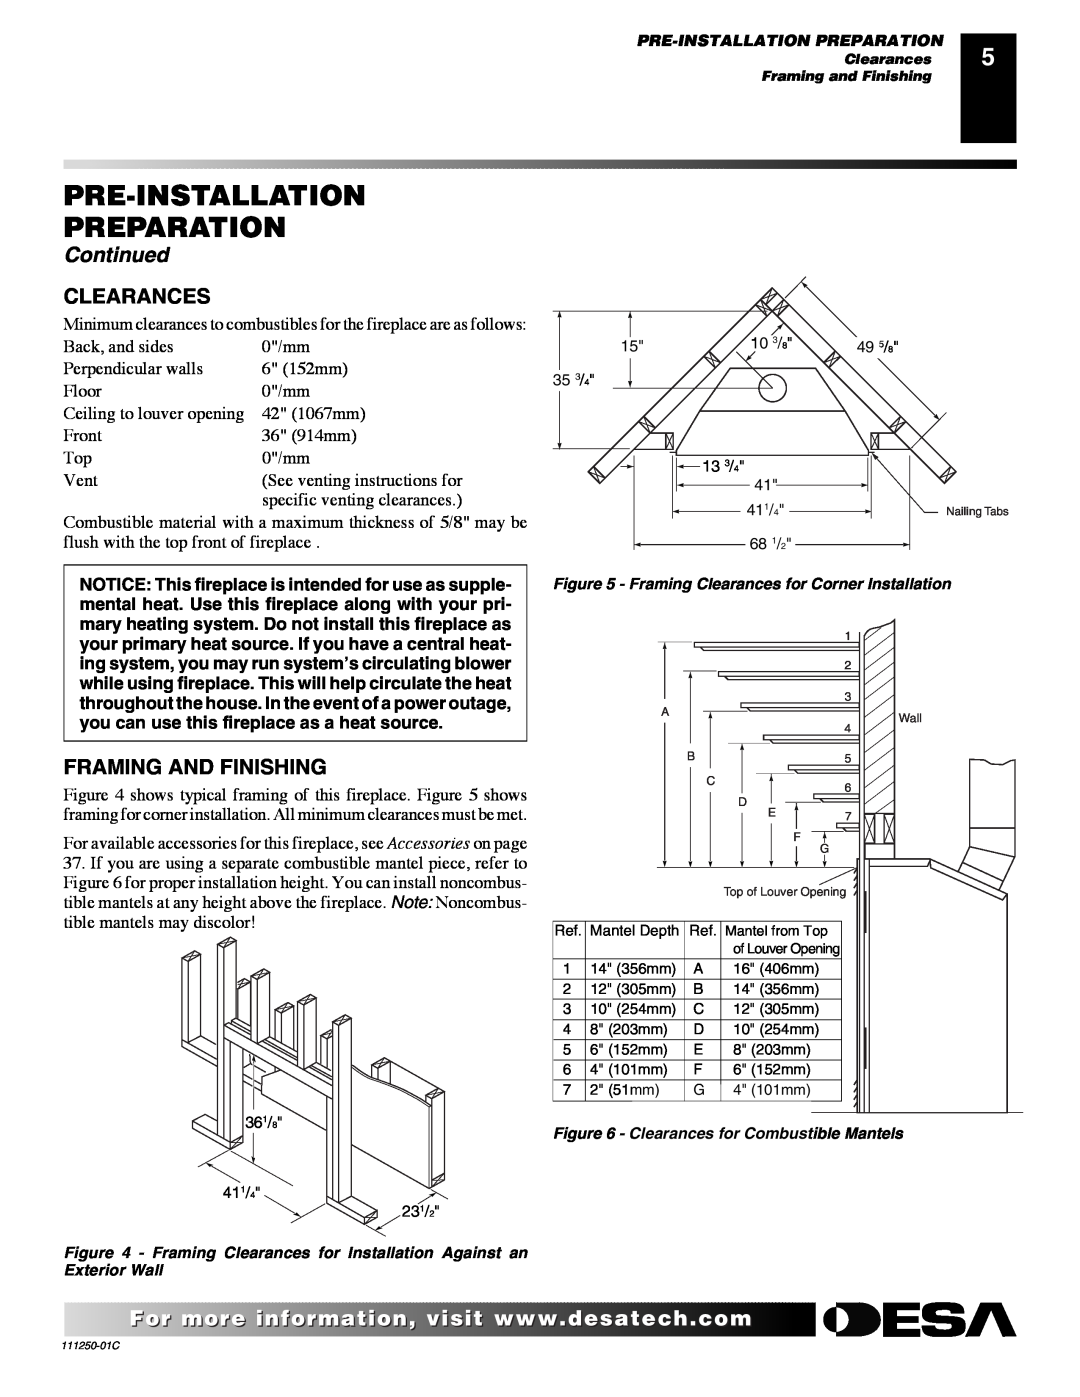 Desa (V)T36NA SERIES installation manual Clearances, Framing And Finishing, Pre-Installation Preparation, Continued 